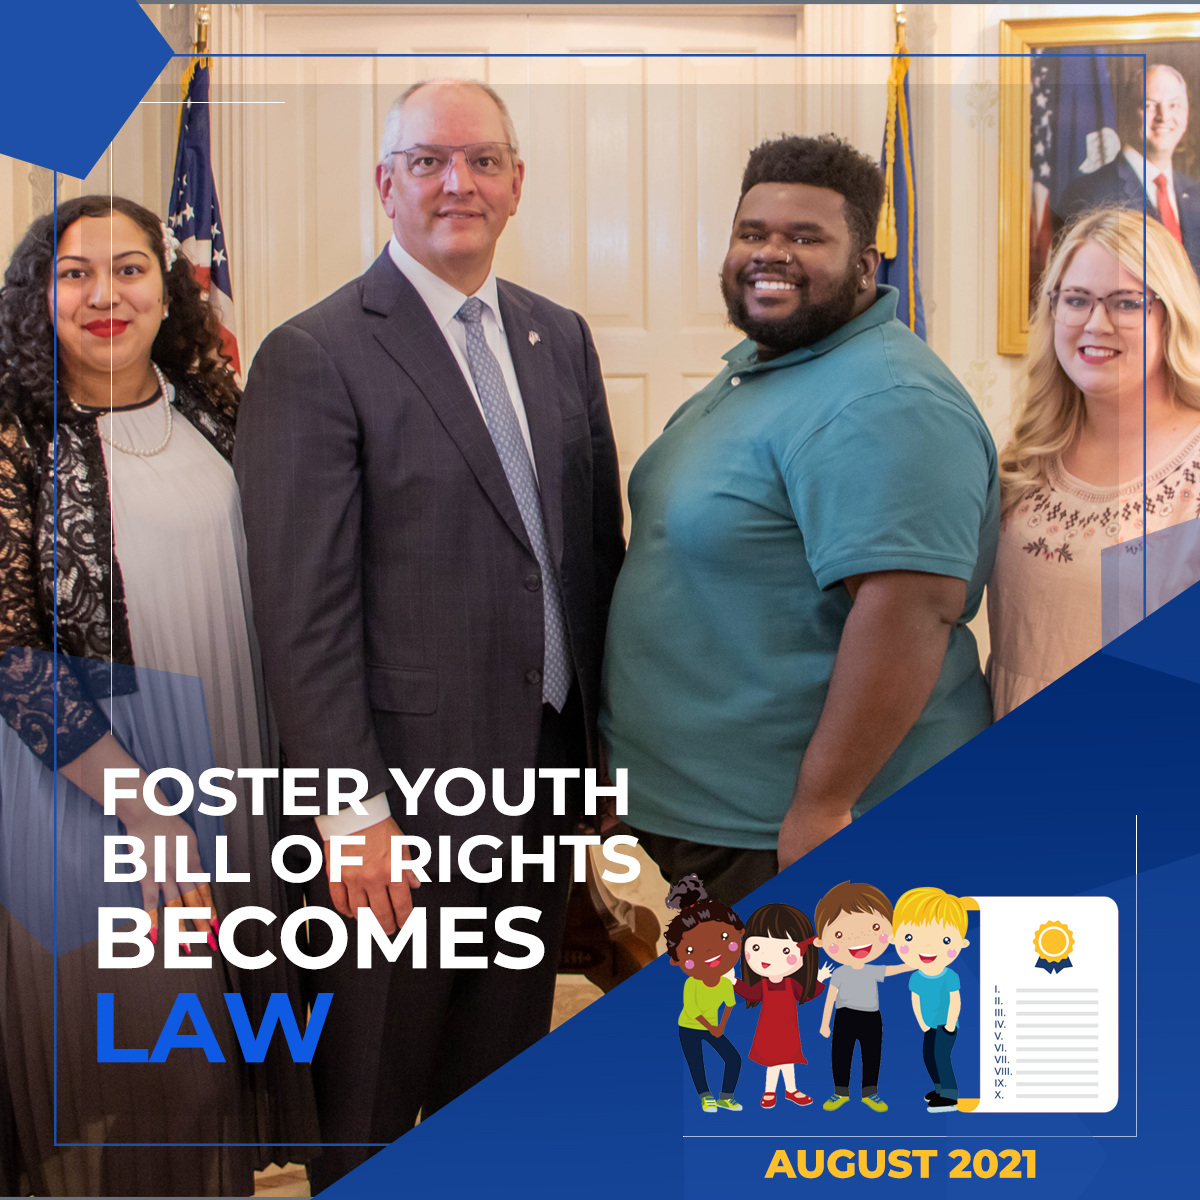 Louisiana Fosters – Foster Youth Bill of Rights Becomes Law